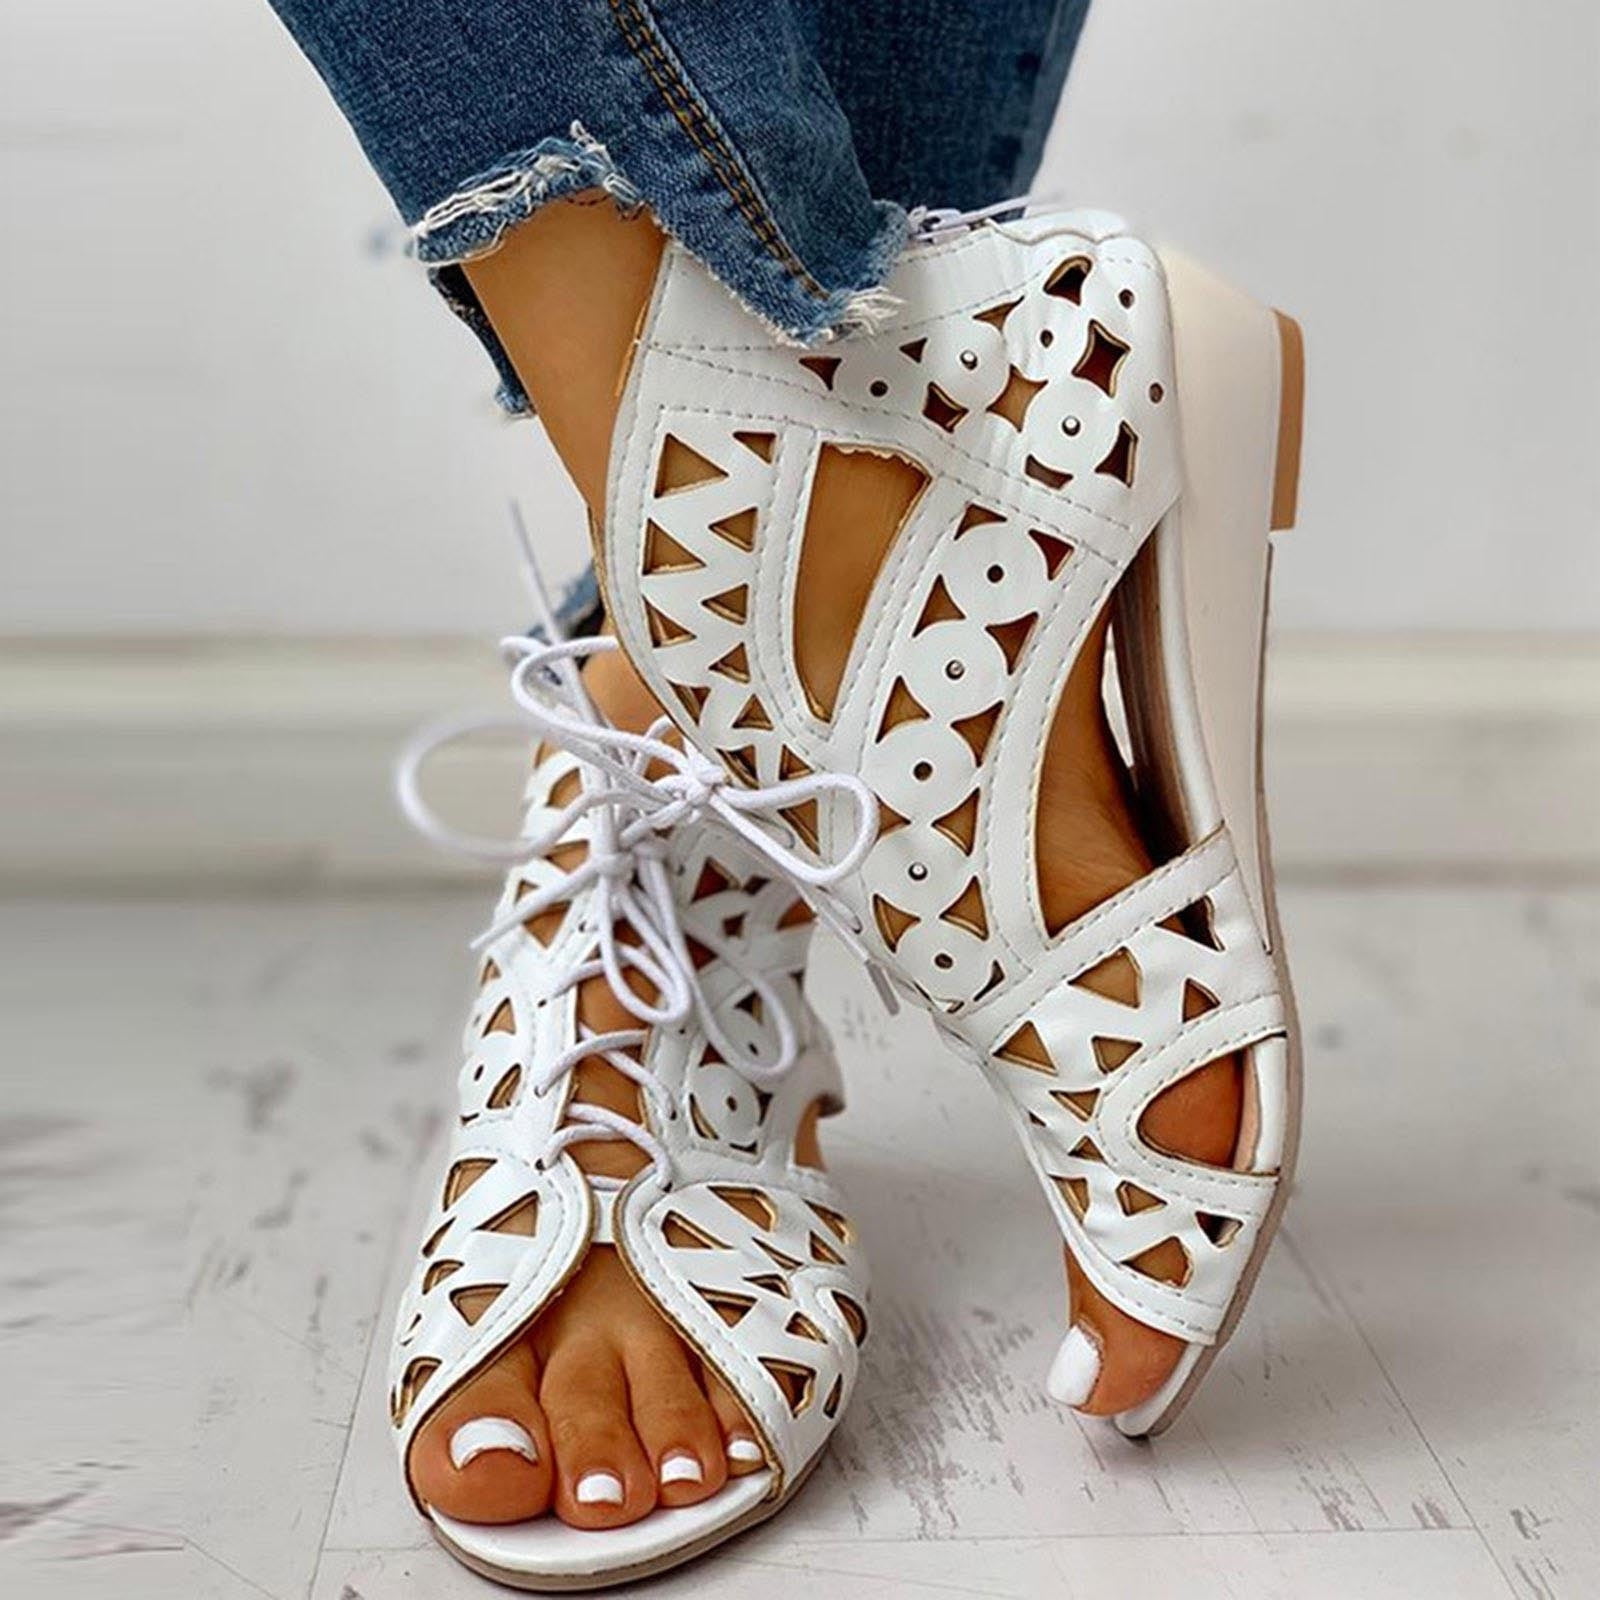 Rontic Studded Gladiator Wedge Heel Sandals Sexy Wedge High Heels For  Women, Open Toe, White/Black, US Sizes 5 13 Perfect For Summer Parties From  Rontic, $57.48 | DHgate.Com